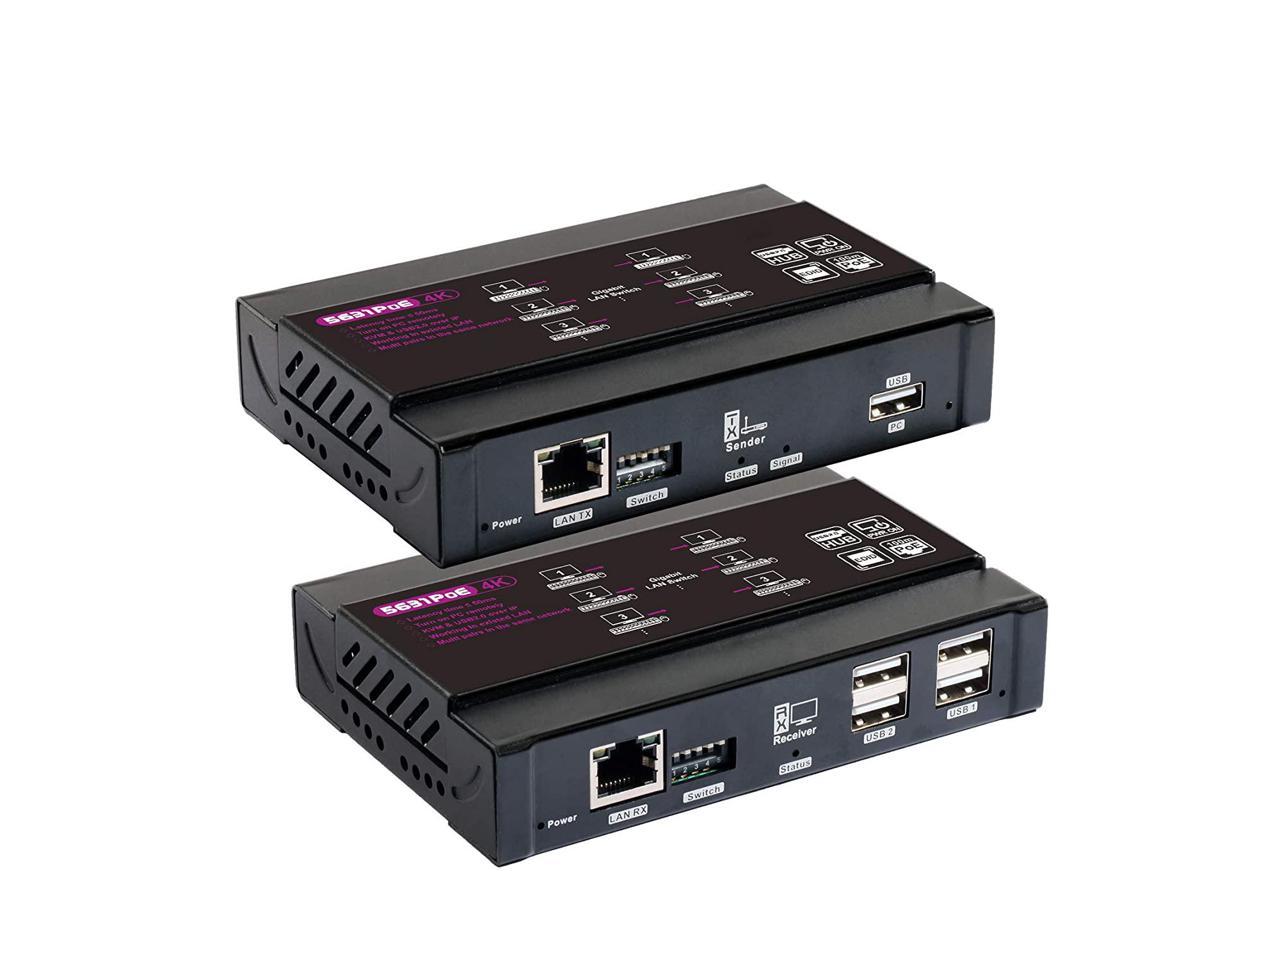 4K HDMI KVM USB Extender Over Single Cat5e/6 up to 100M KVM Extender Support 1080P@60Hz Lossless-Near Zero Latency Plug & Play 4 Ports USB2.0 328ft Keyboard & Mouse Ethernet Network 